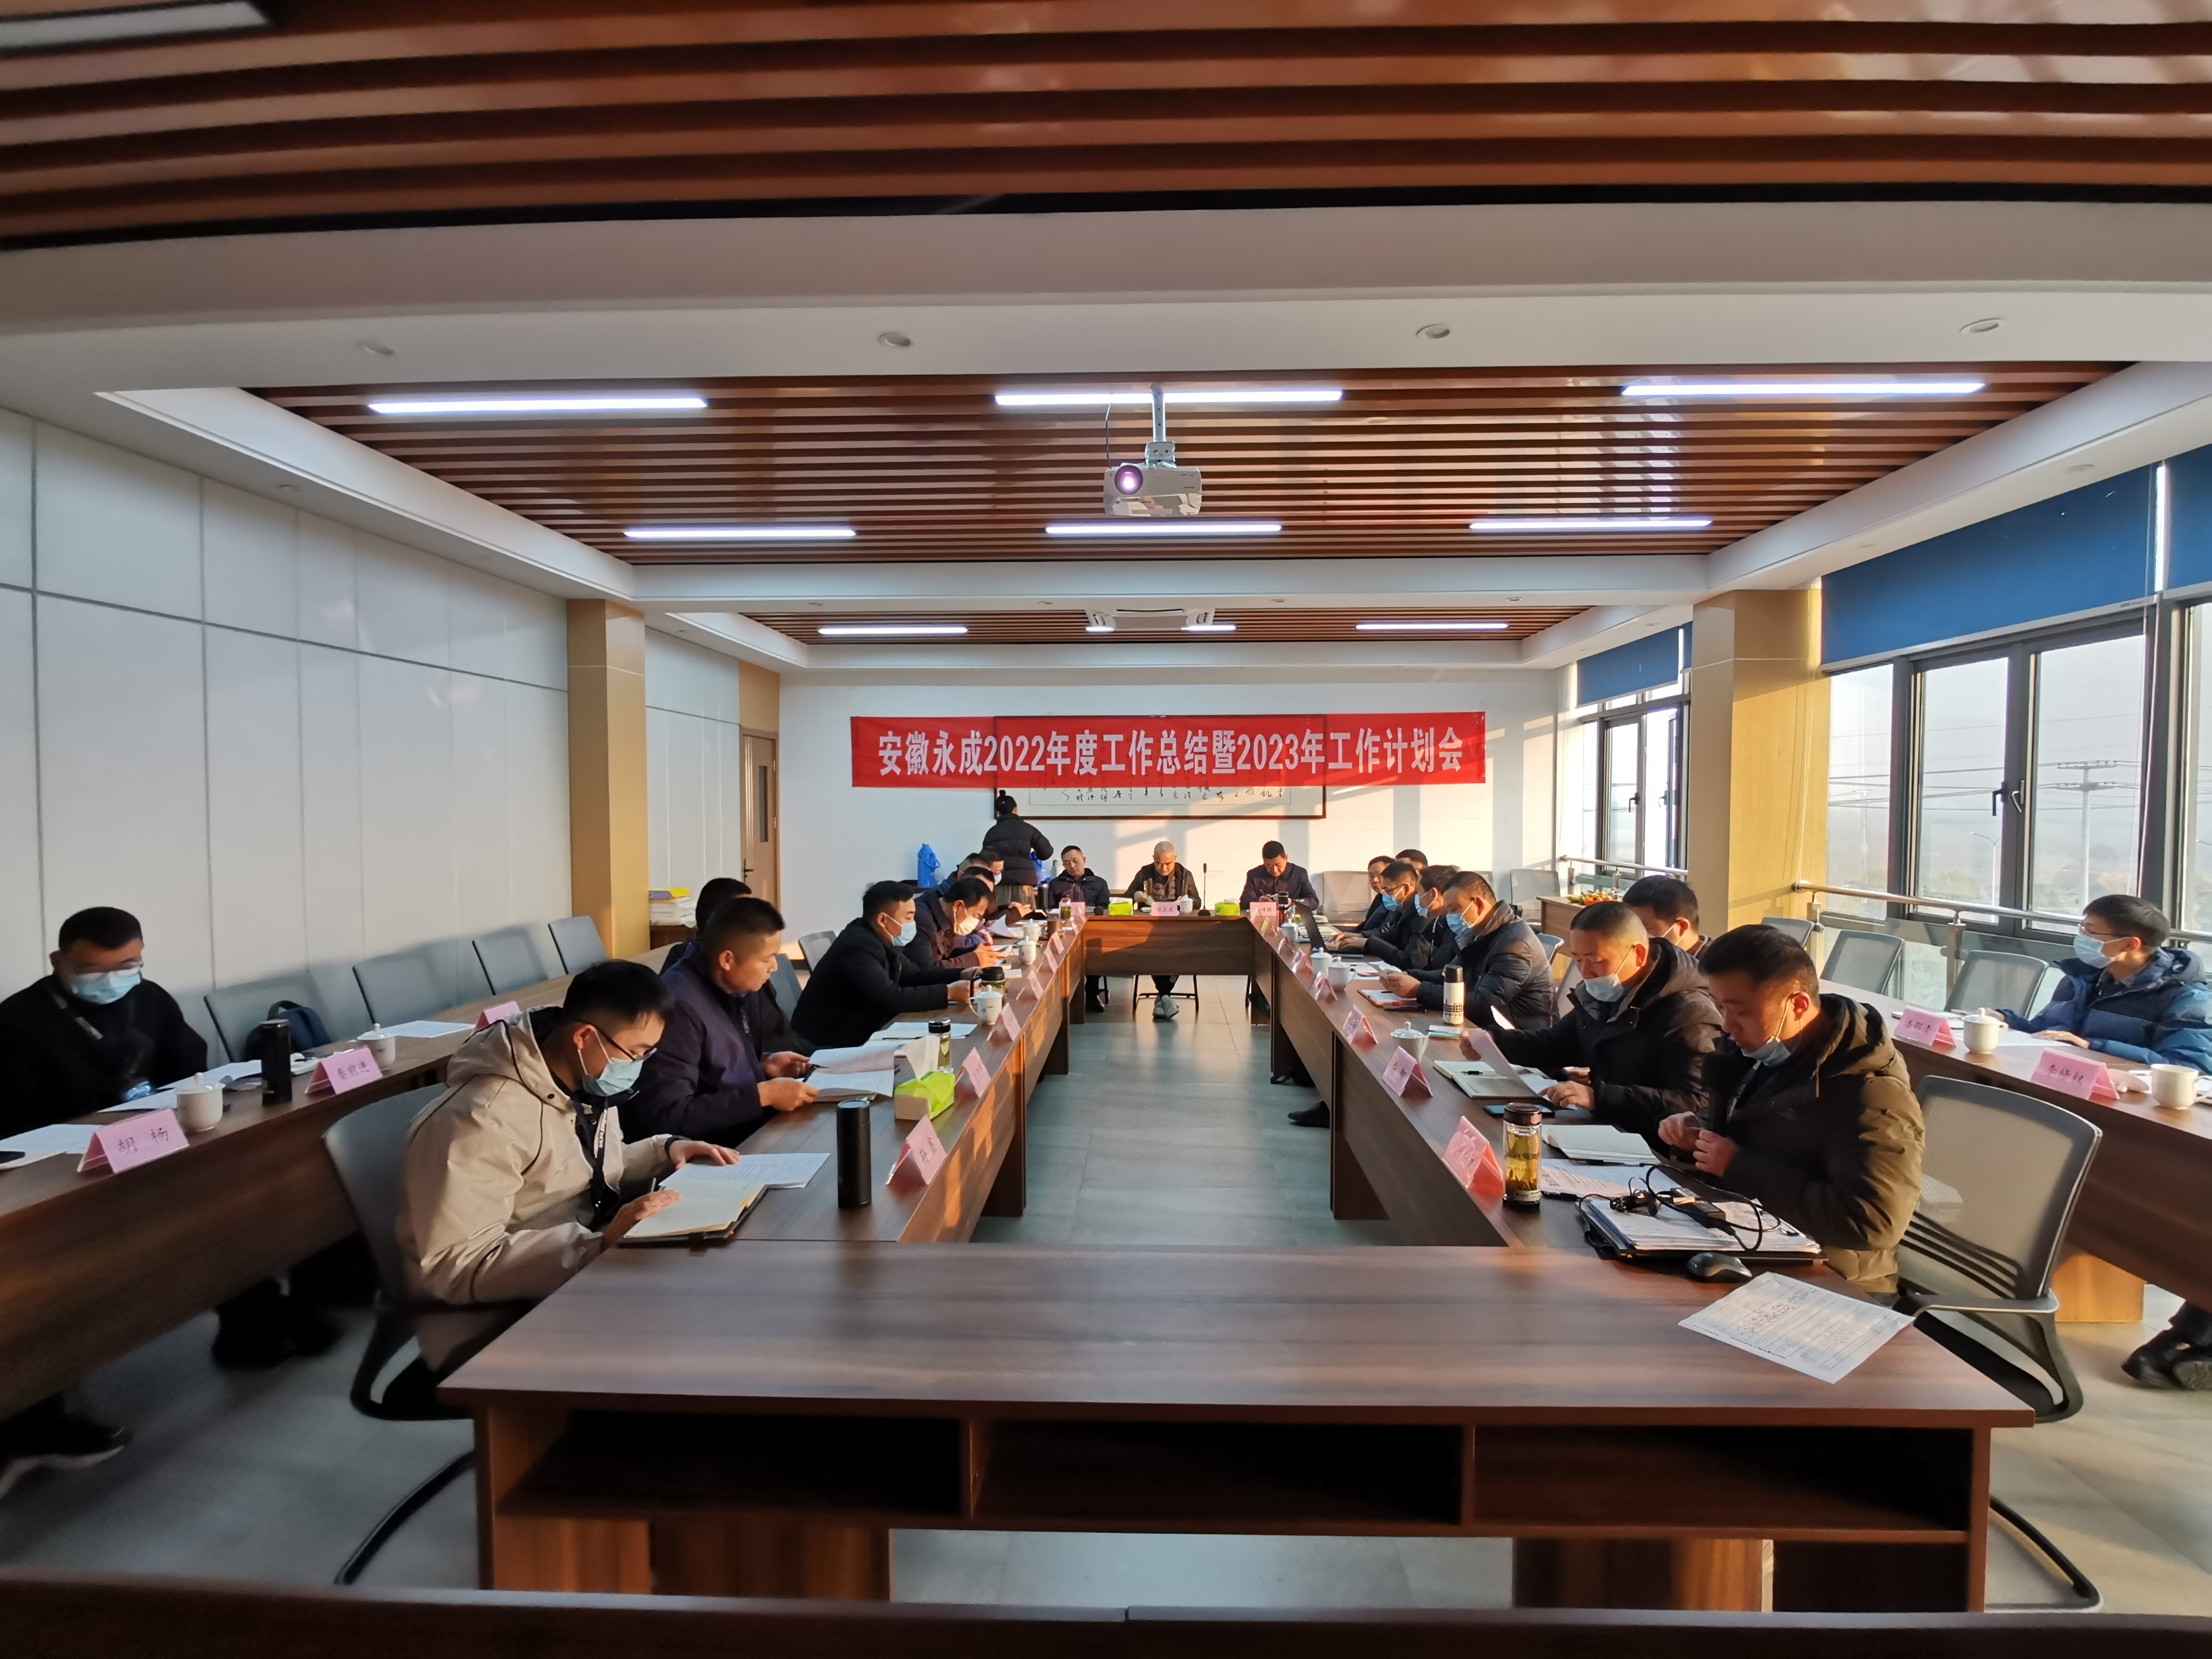 The 2022 Annual Administrative Summary Meeting of Anhui Yongcheng Company Was Successfully Held